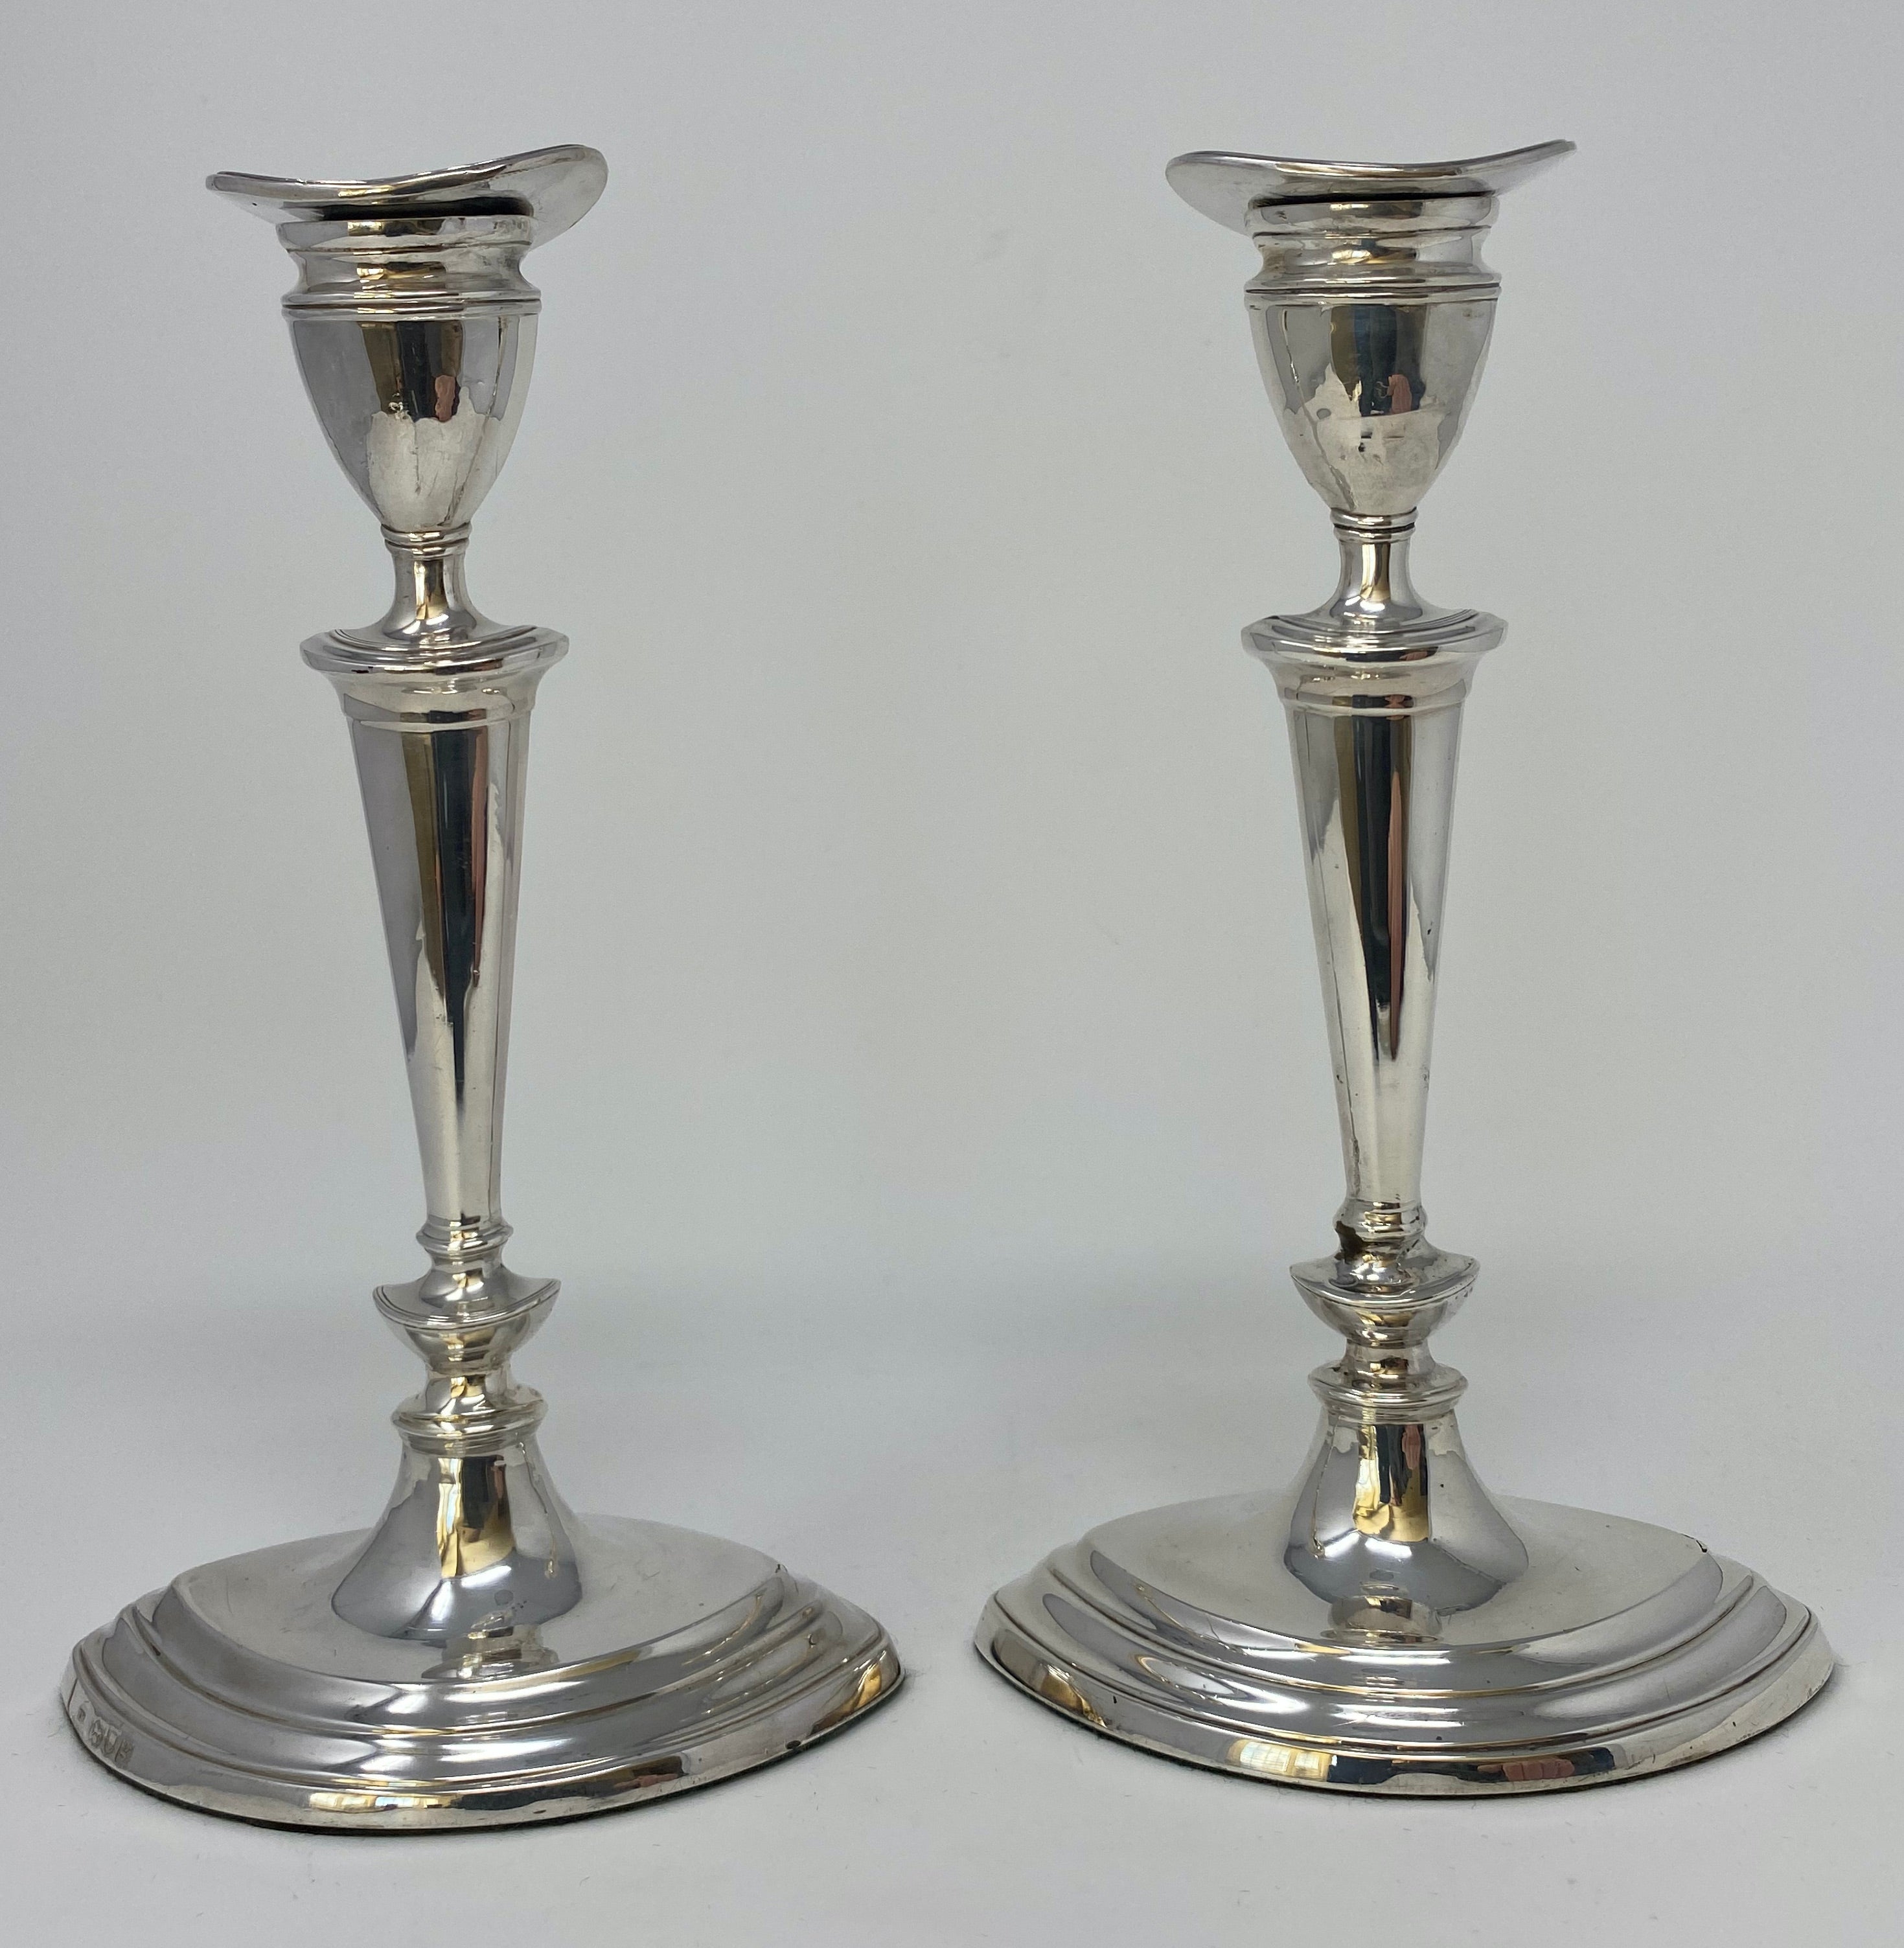 Pair of Antique Silver Oval Candlesticks